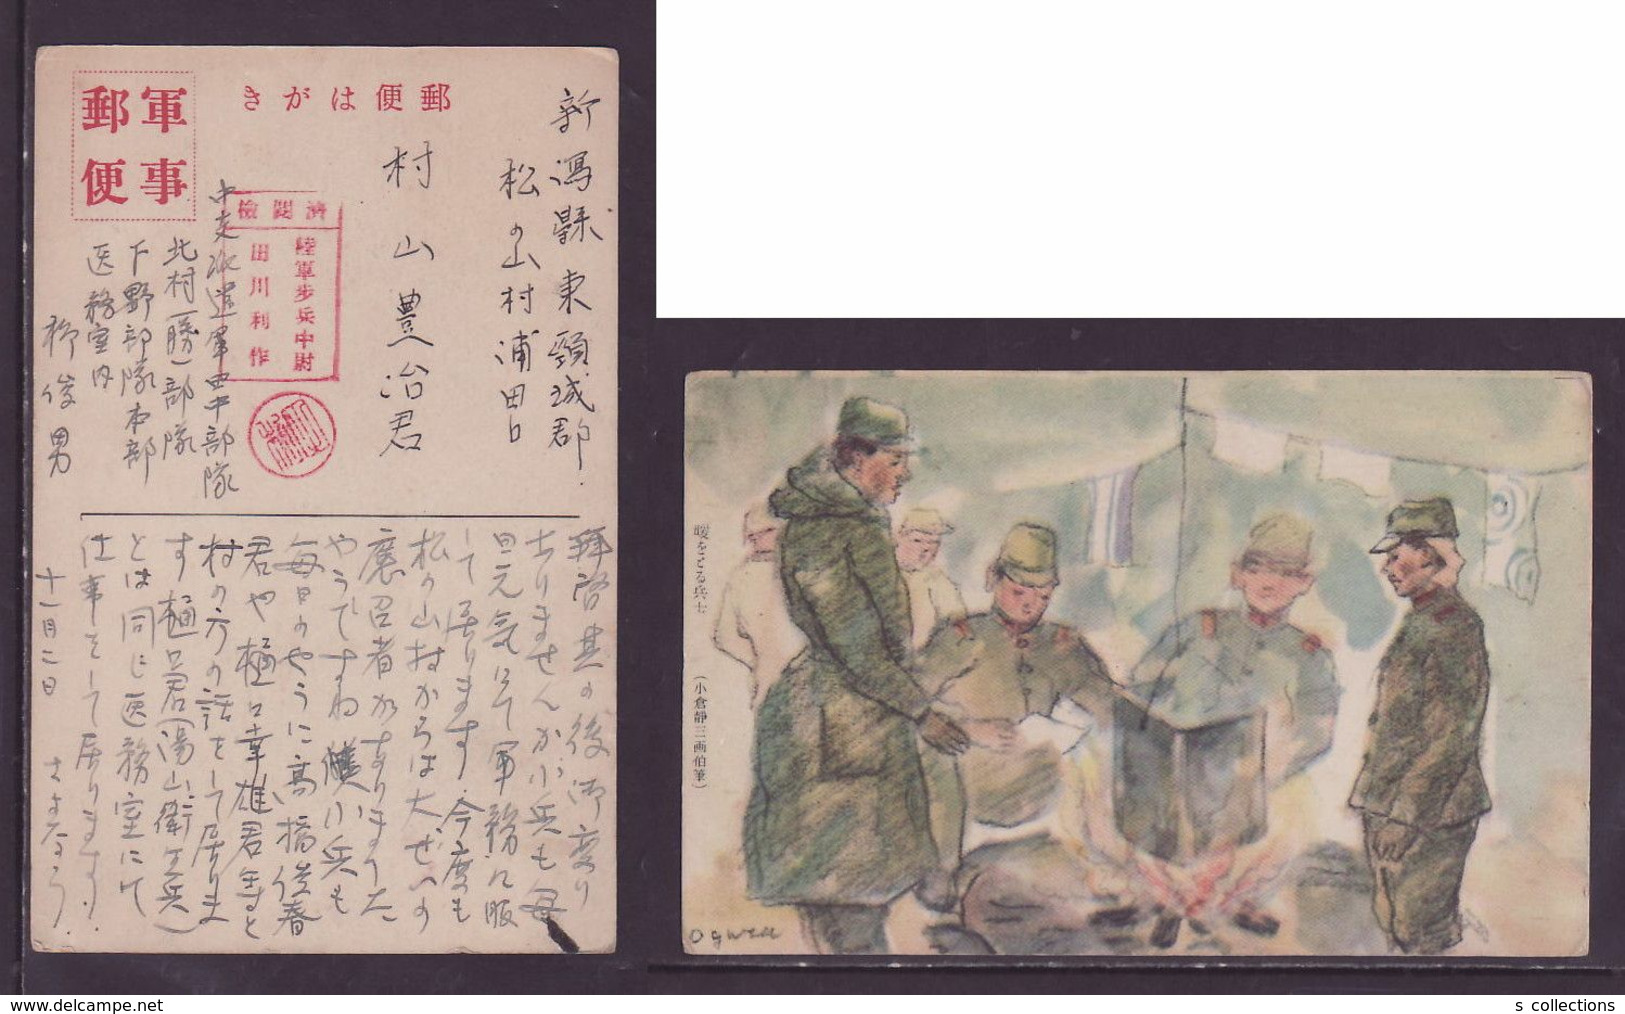 JAPAN WWII Military Japanese Soldier Picture Postcard Central ChinaWW2 MANCHURIA CHINE MANDCHOUKOUO JAPON GIAPPONE - 1941-45 Northern China